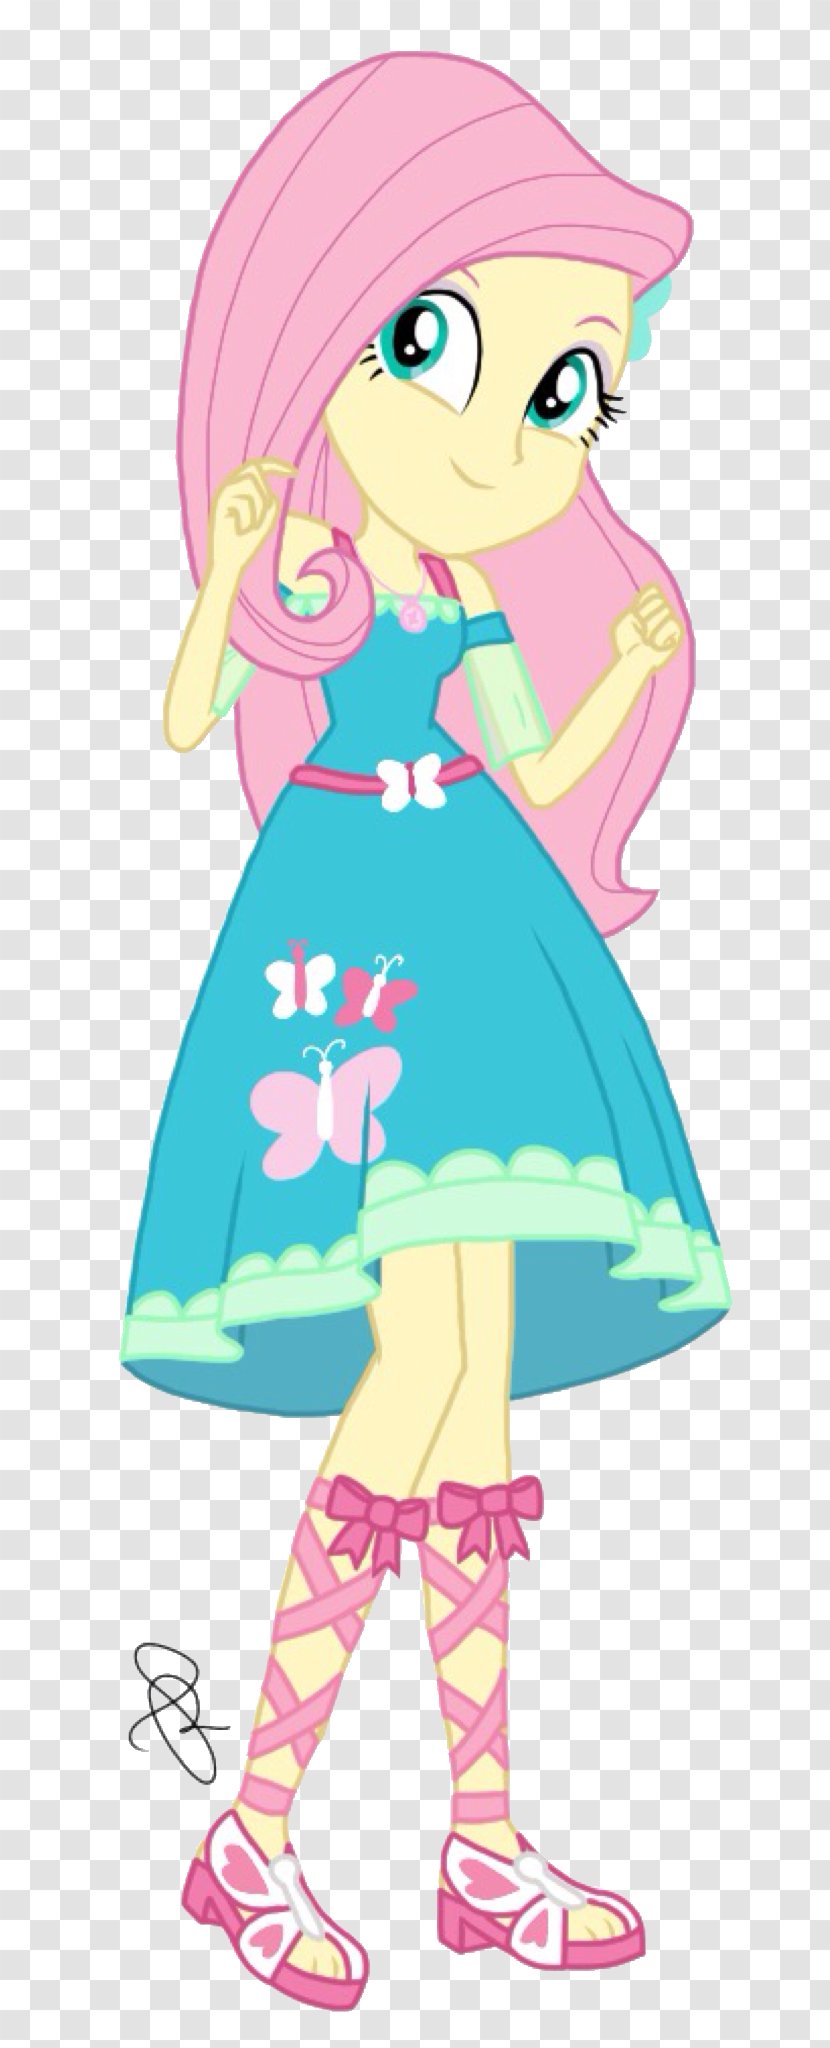 Fluttershy Rarity Pinkie Pie Rainbow Dash Pony - Heart - Digital Sequence Transparent PNG